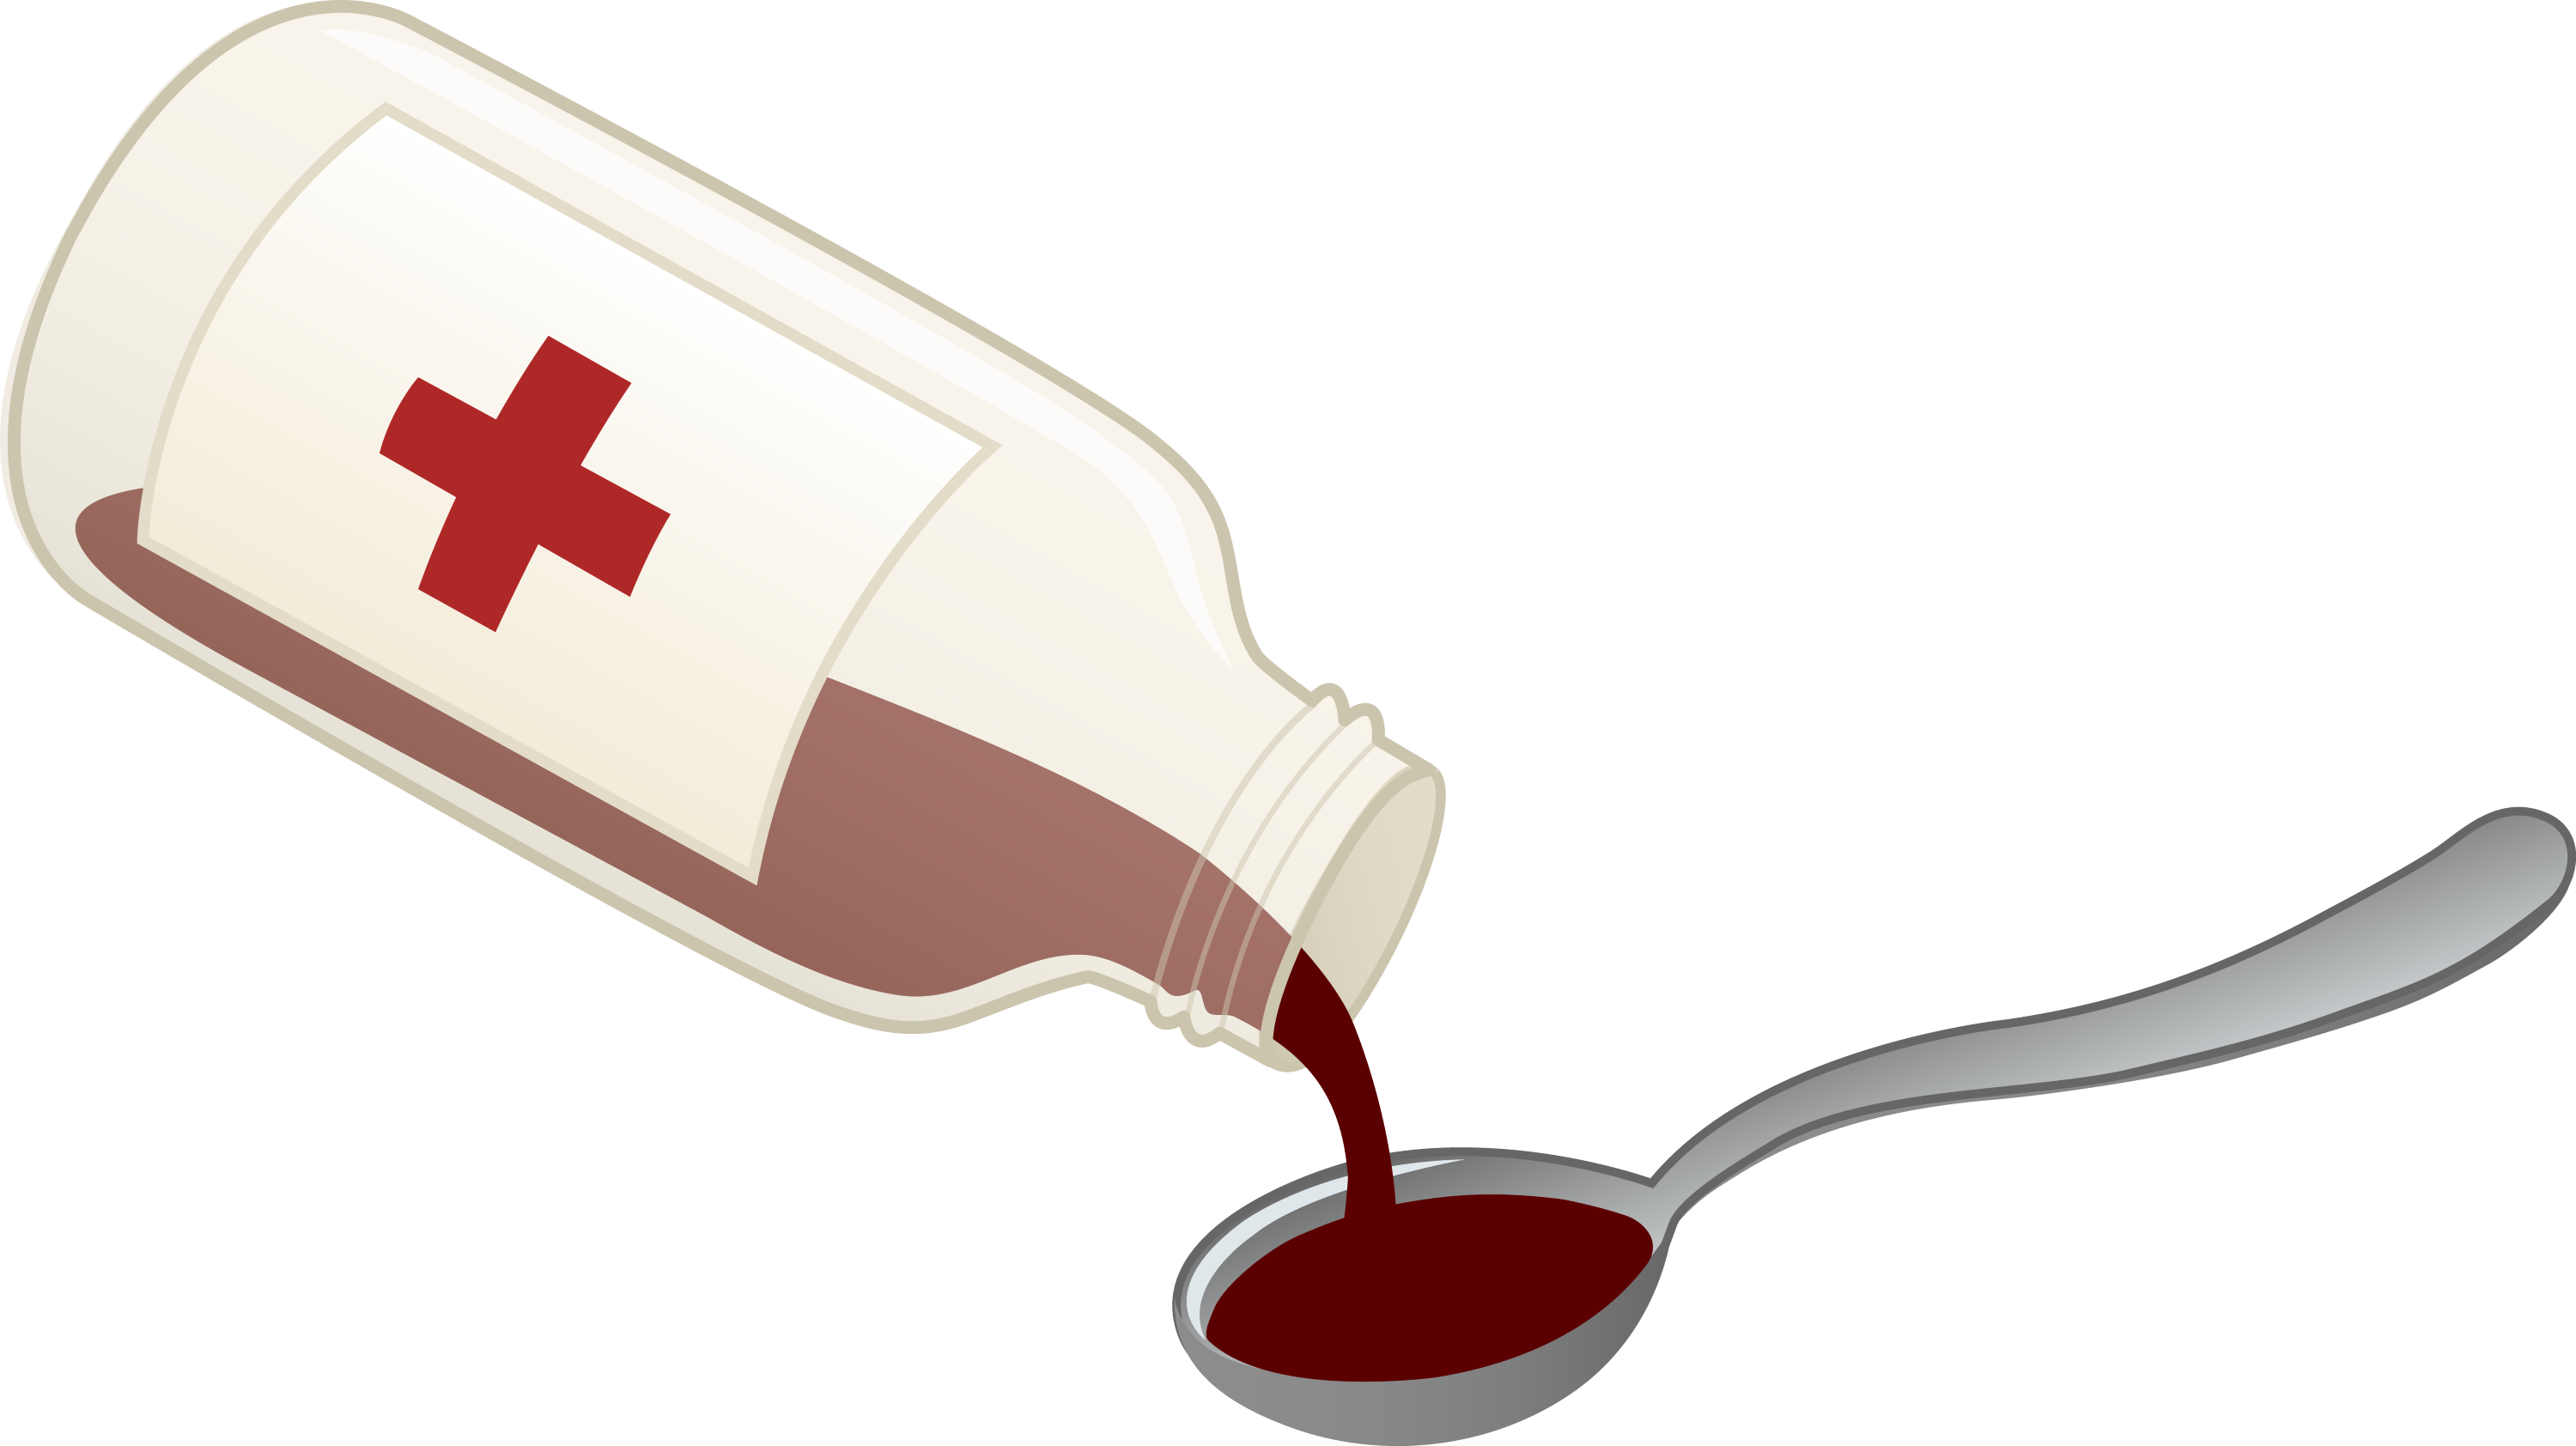 Cough Syrup and Spoon - Free Clip Art